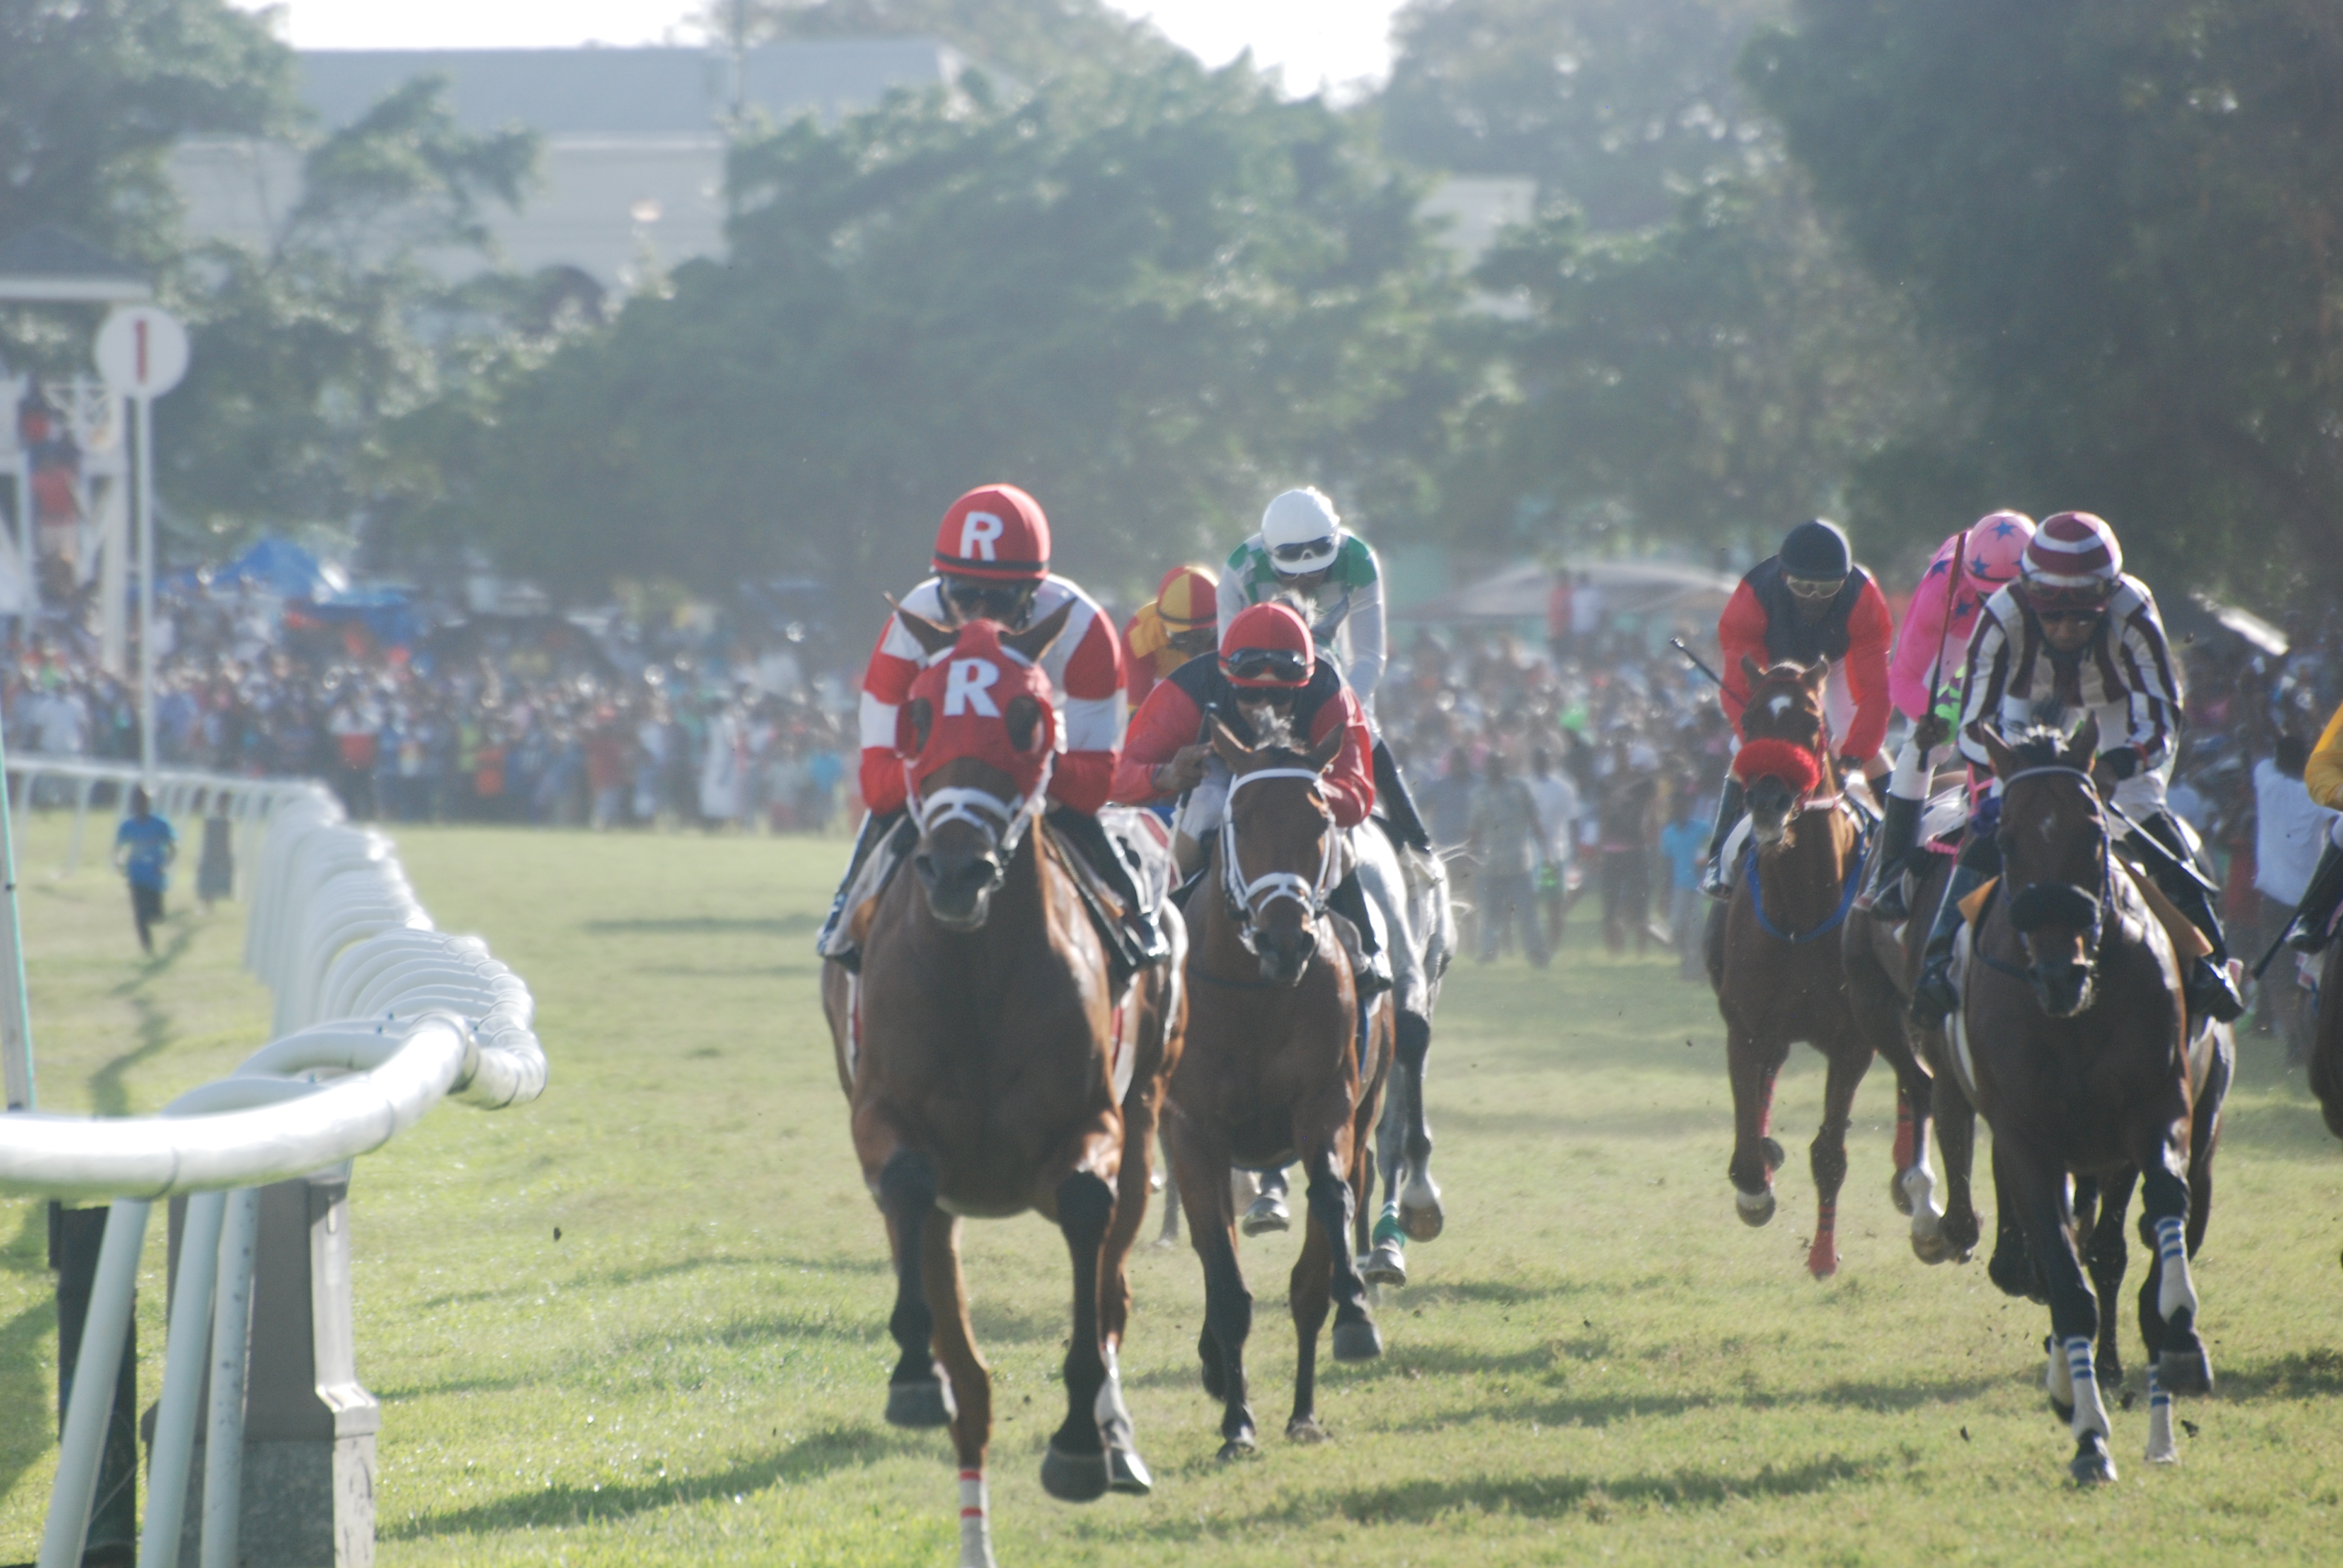 Major Marvel wins Sandy Lane Gold Cup Horse Racing news from